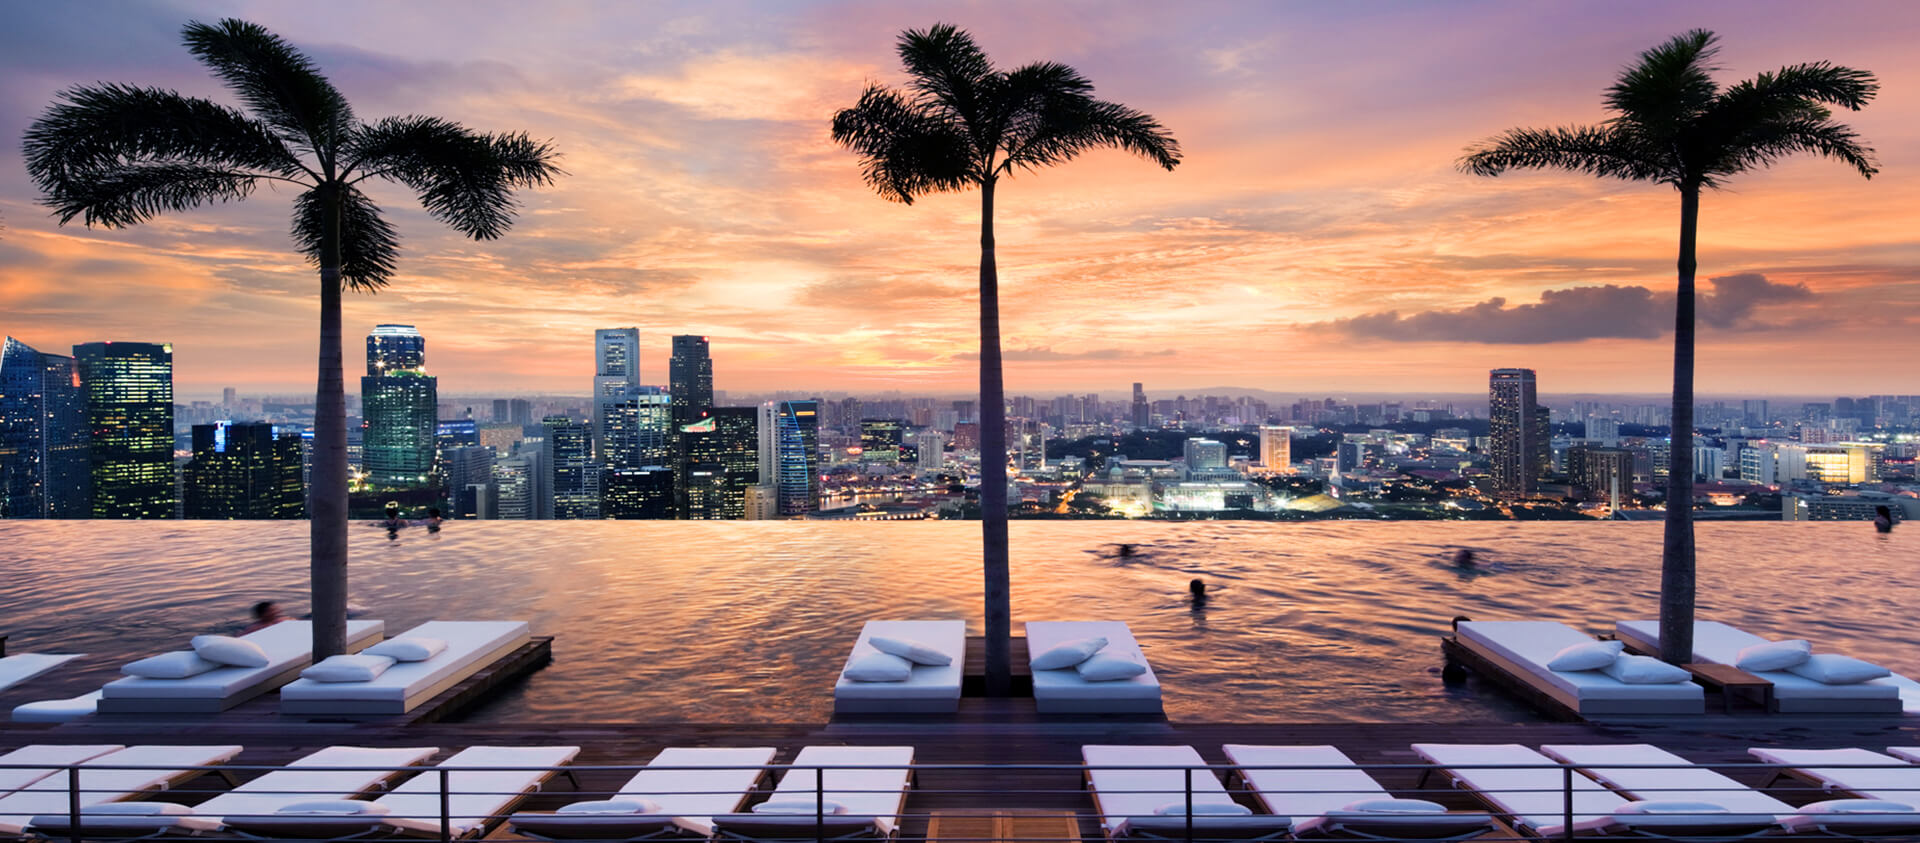 7 Best Romantic Places In Singapore / Marina Bay Sands